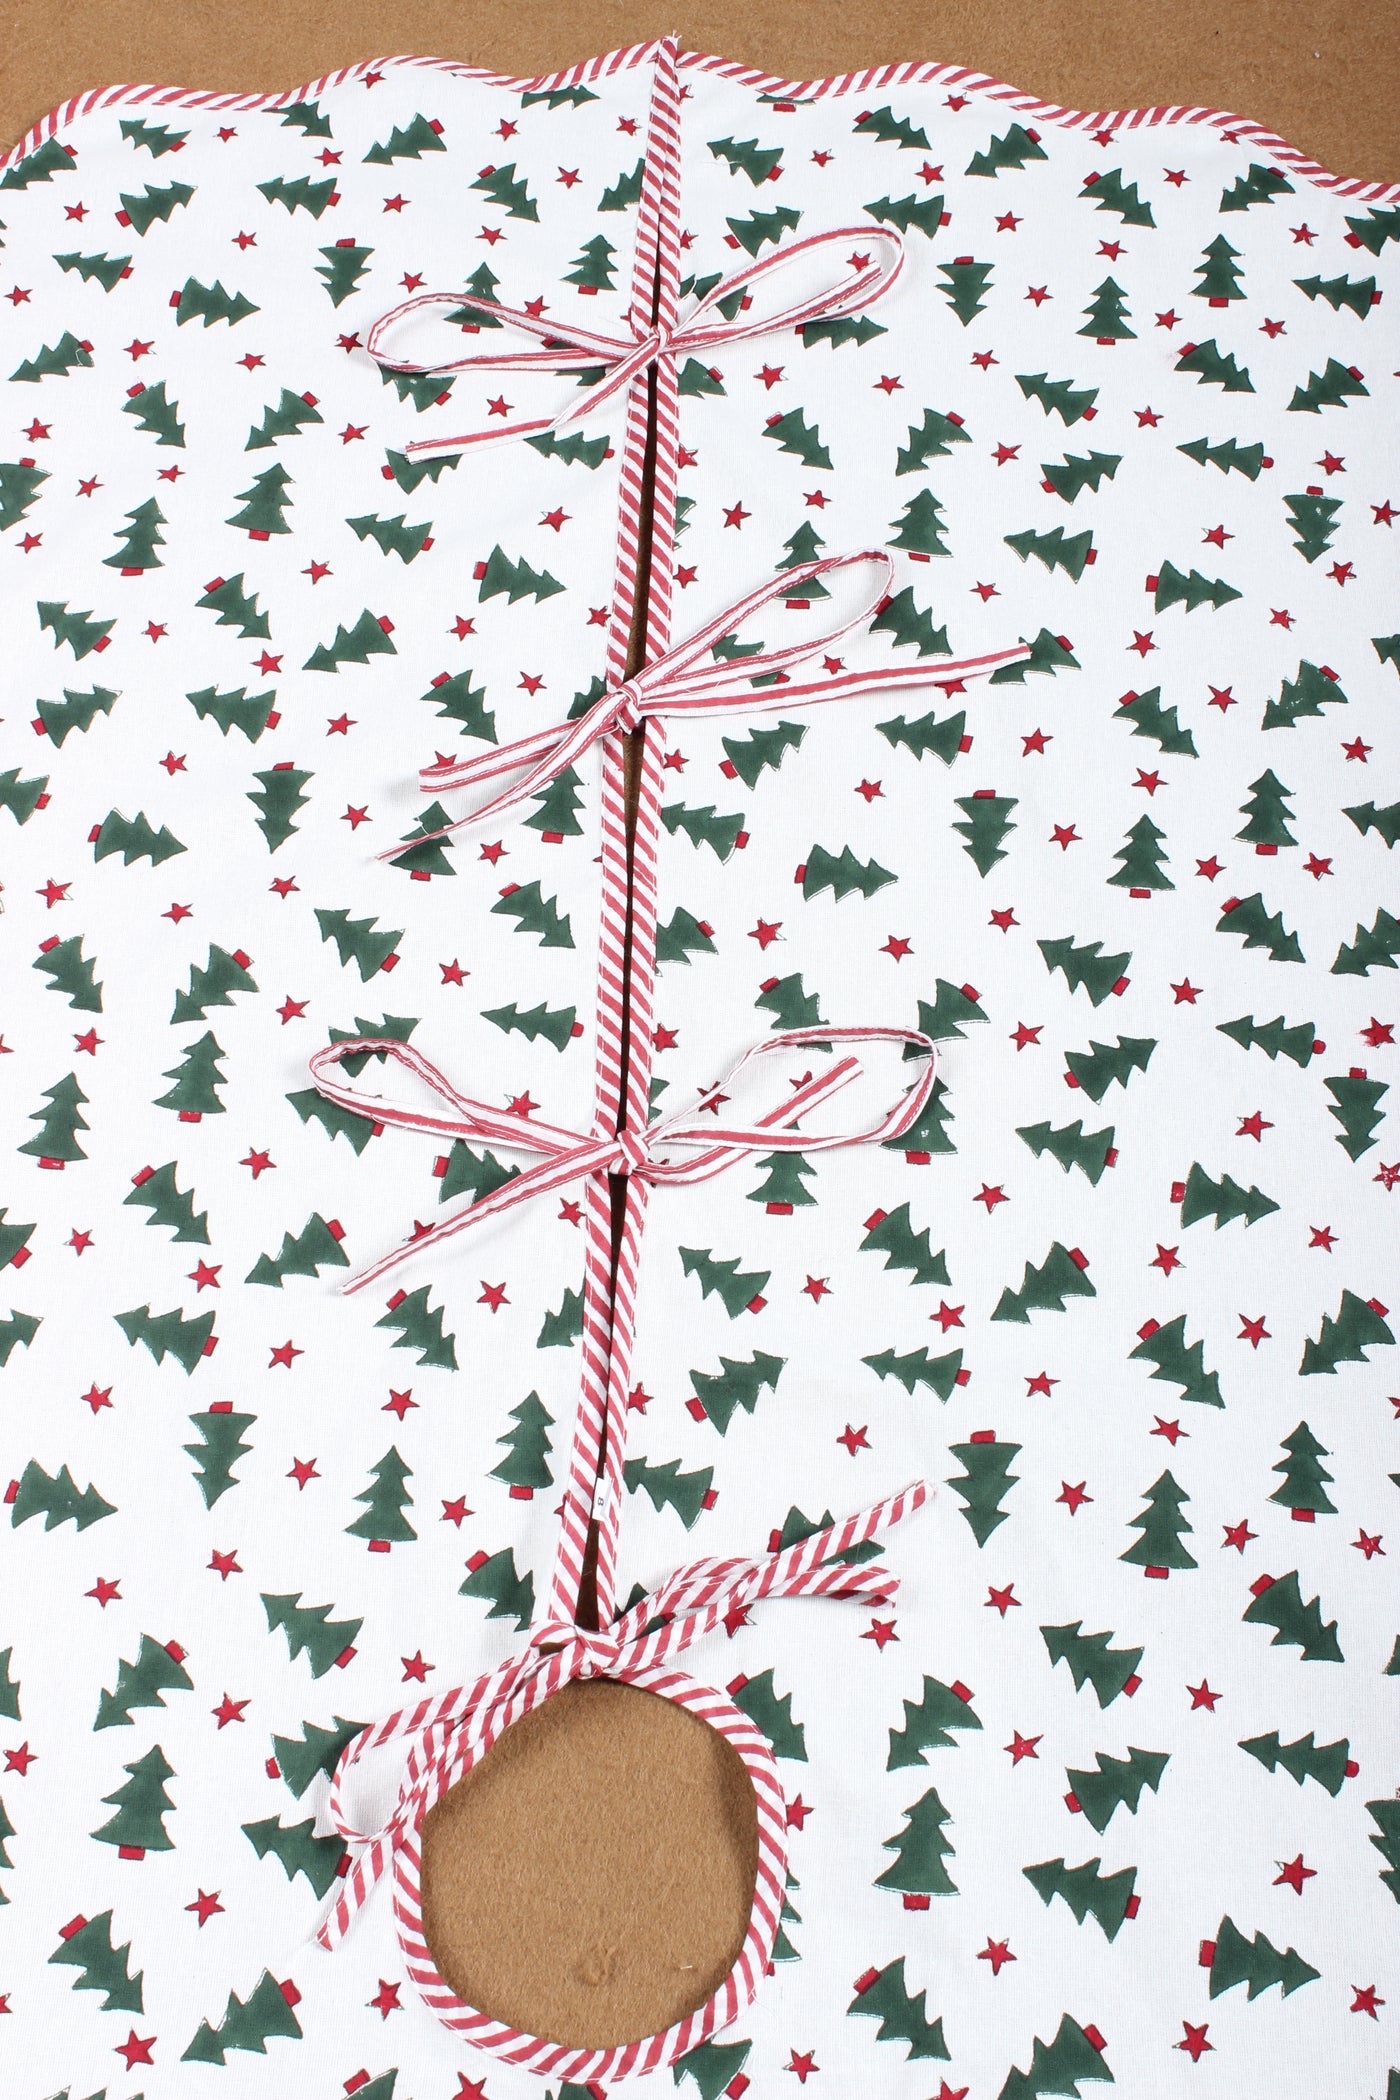 Indian Floral Hand Block Print Piping Scallops Cotton Cloth Christmas Tree Skirt, Farmhouse Outdoor Home House Christmas Decor, Unique